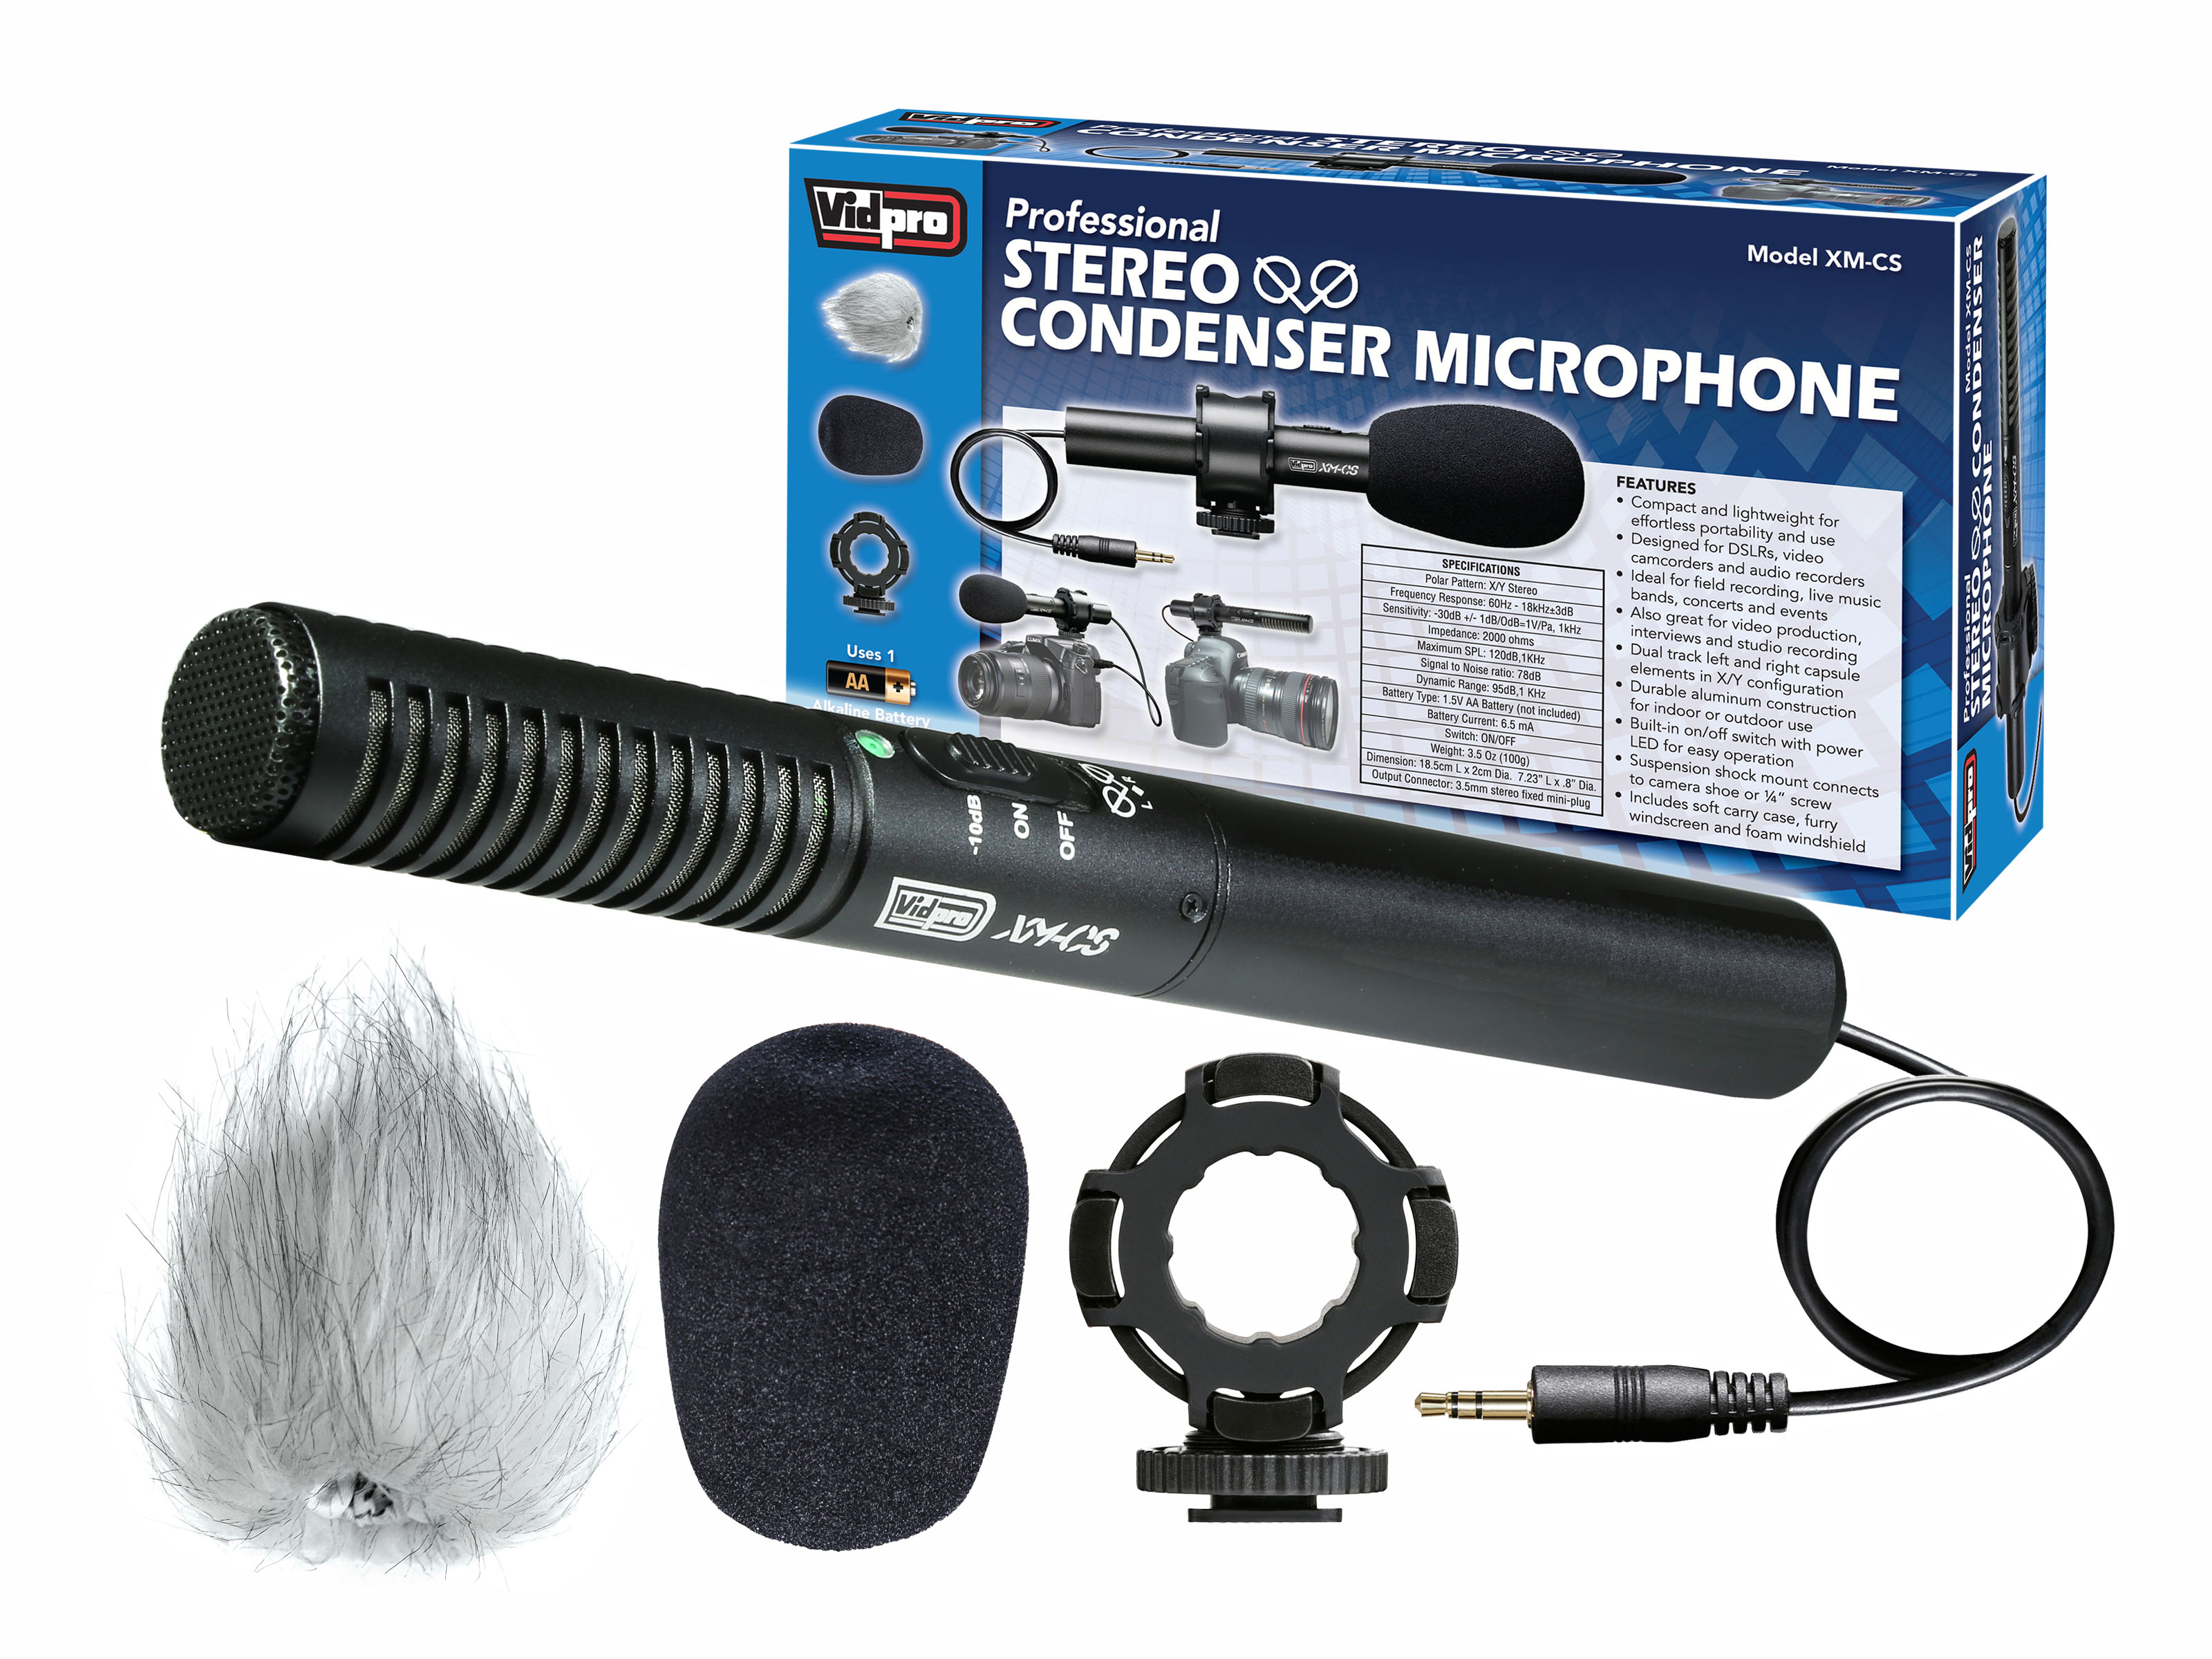 Vidpro XM-CS Condenser Stereo XY Microphone Kit  for DSLR’s, video camcorders and audio recorders